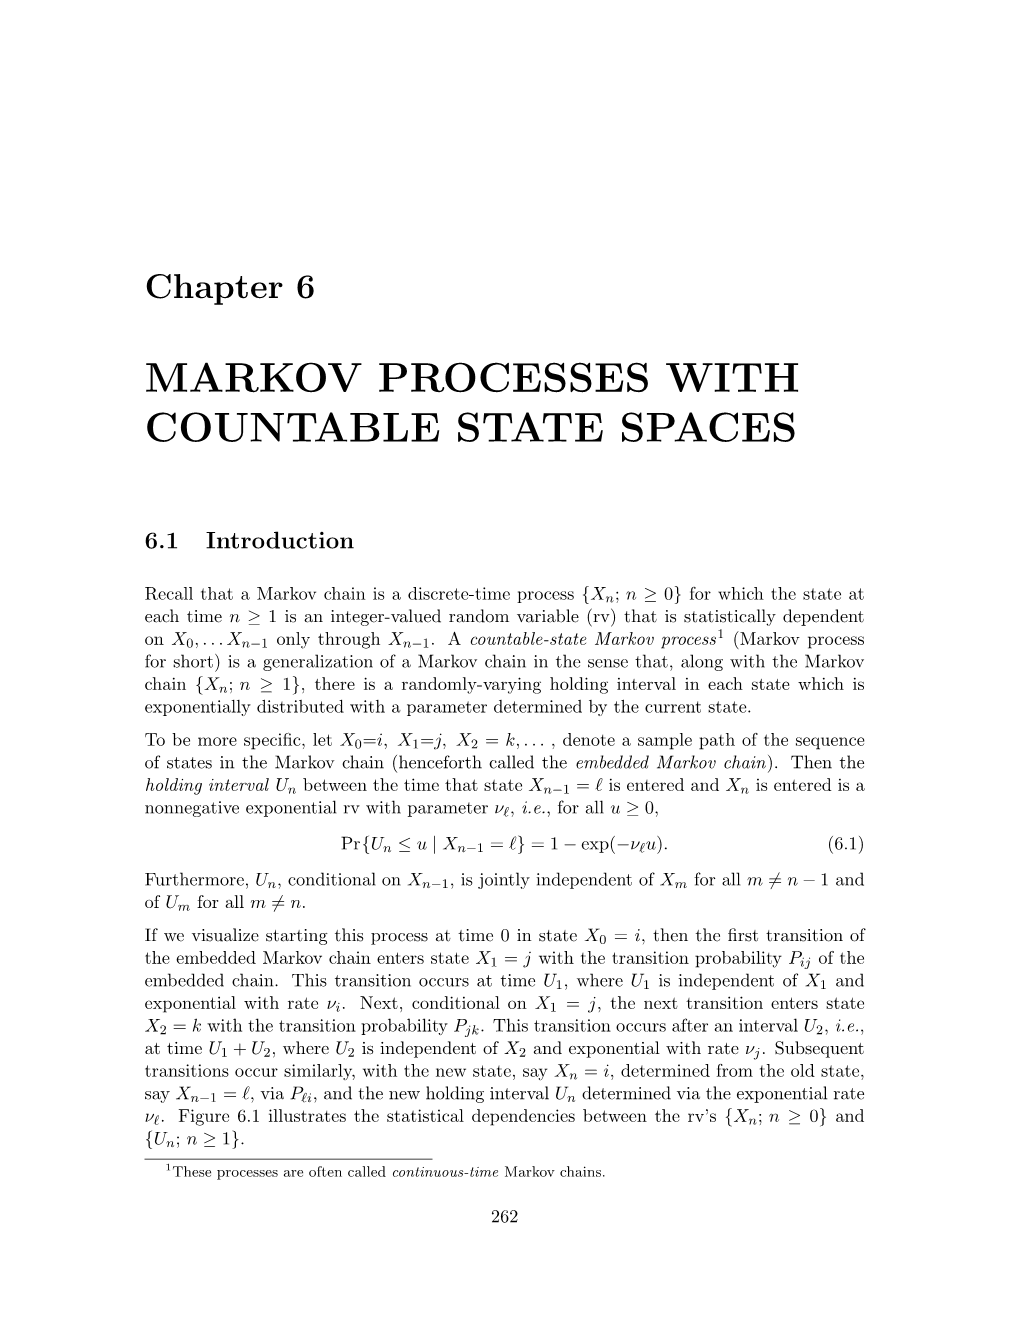 Discrete Stochastic Processes, Chapter 6: Markov Processes With